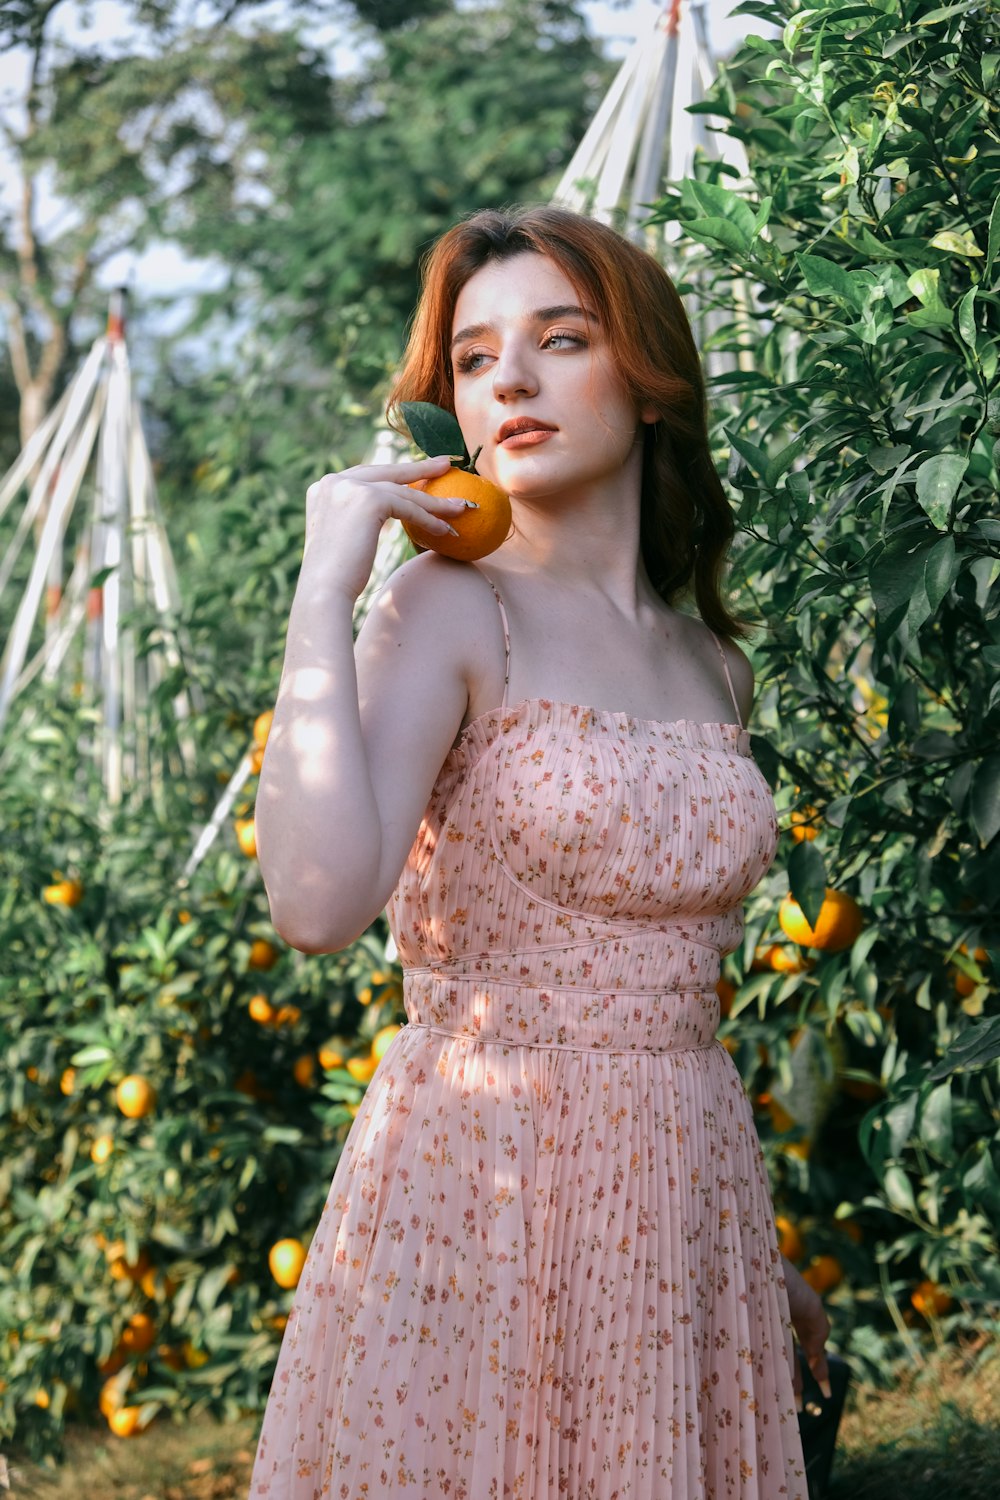 a person in a dress holding an orange object in a garden